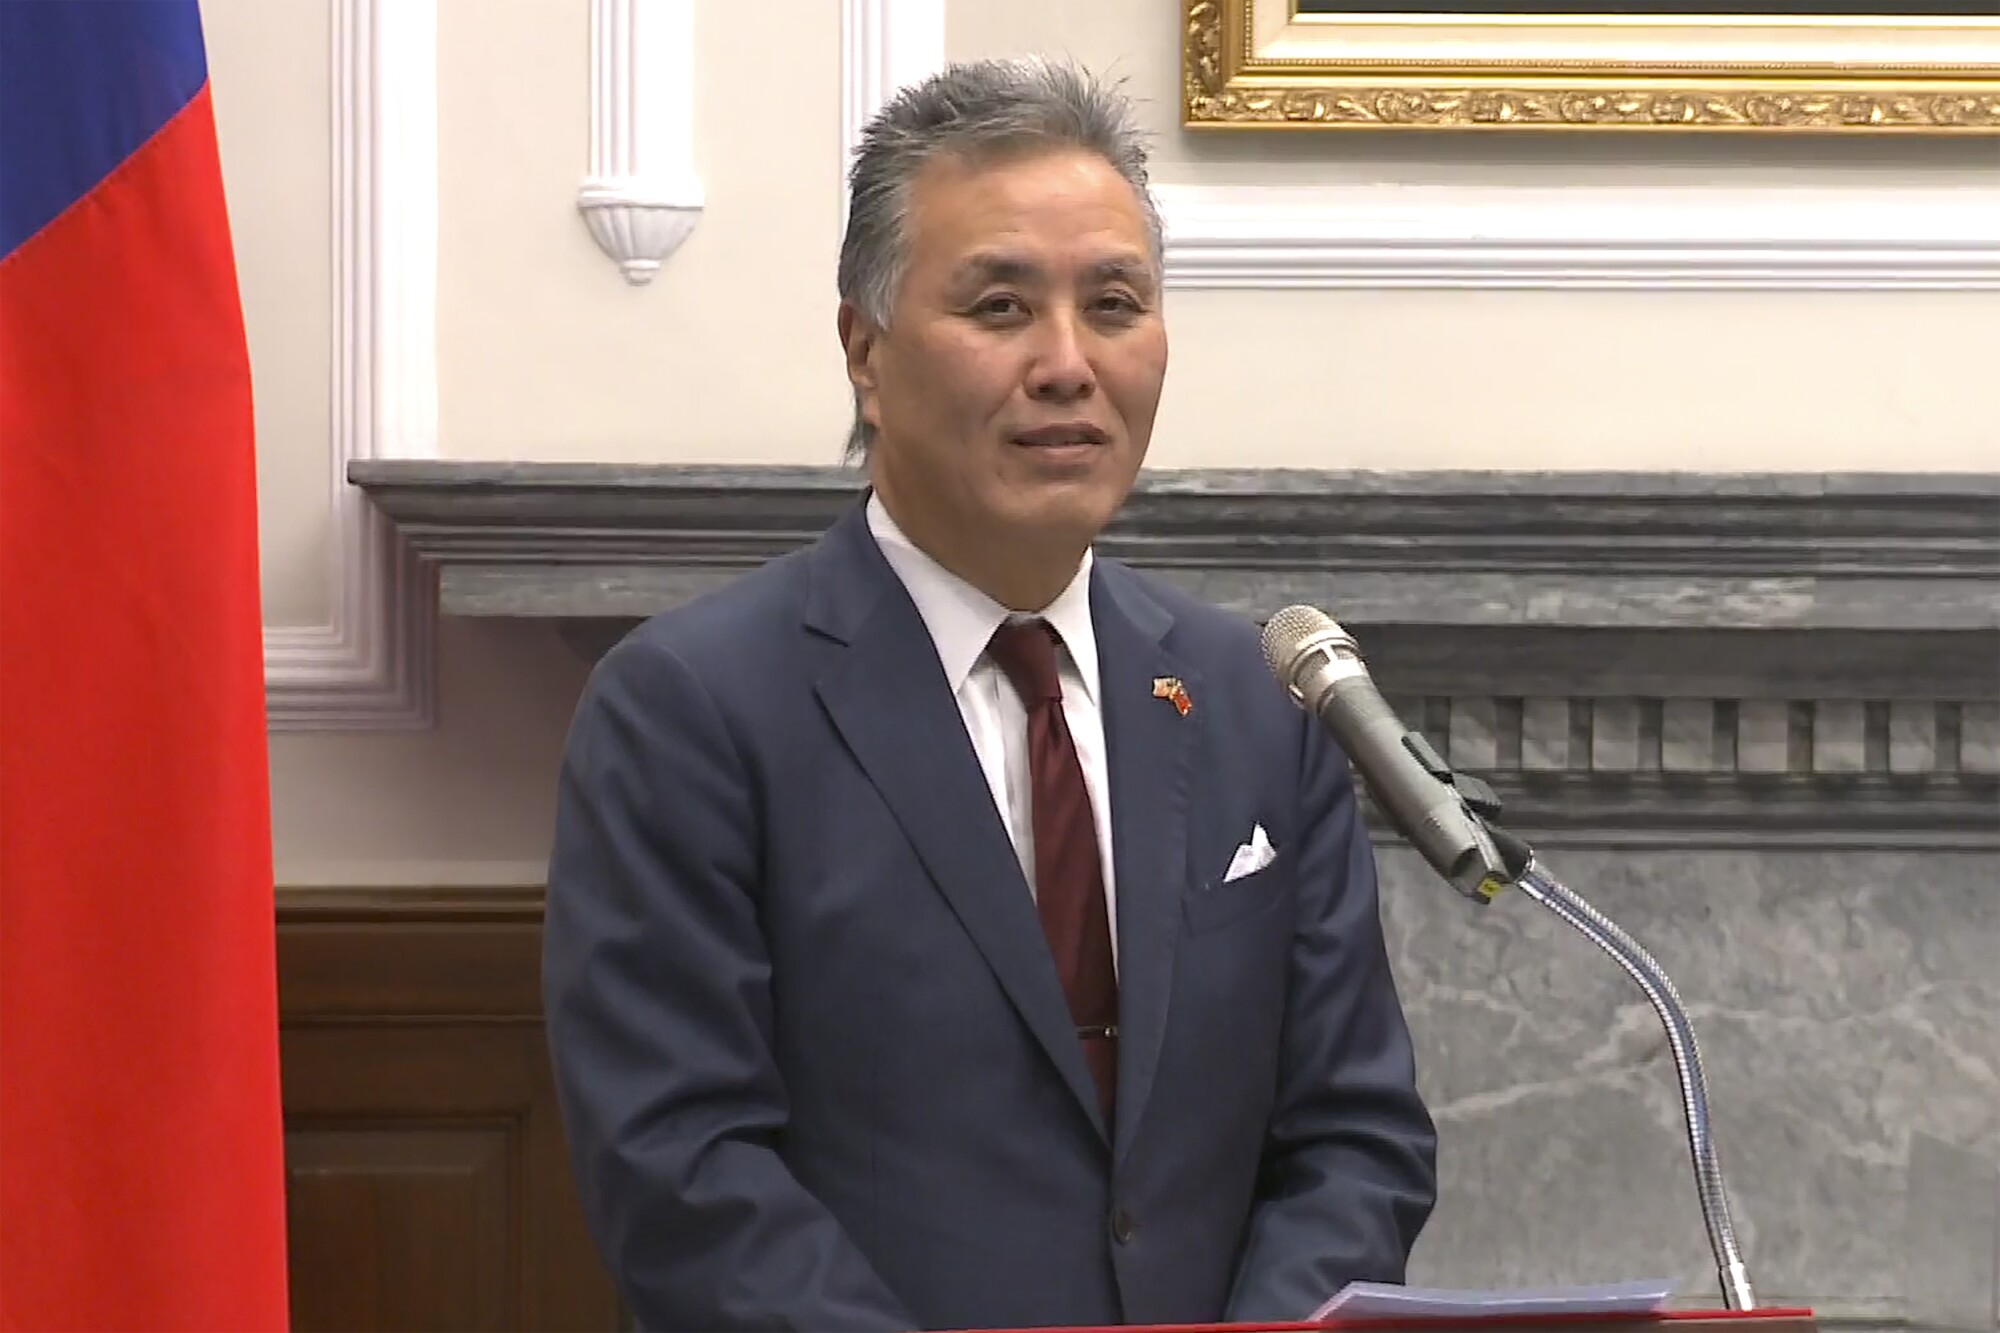 Rep. Mark Takano stands at a microphone.